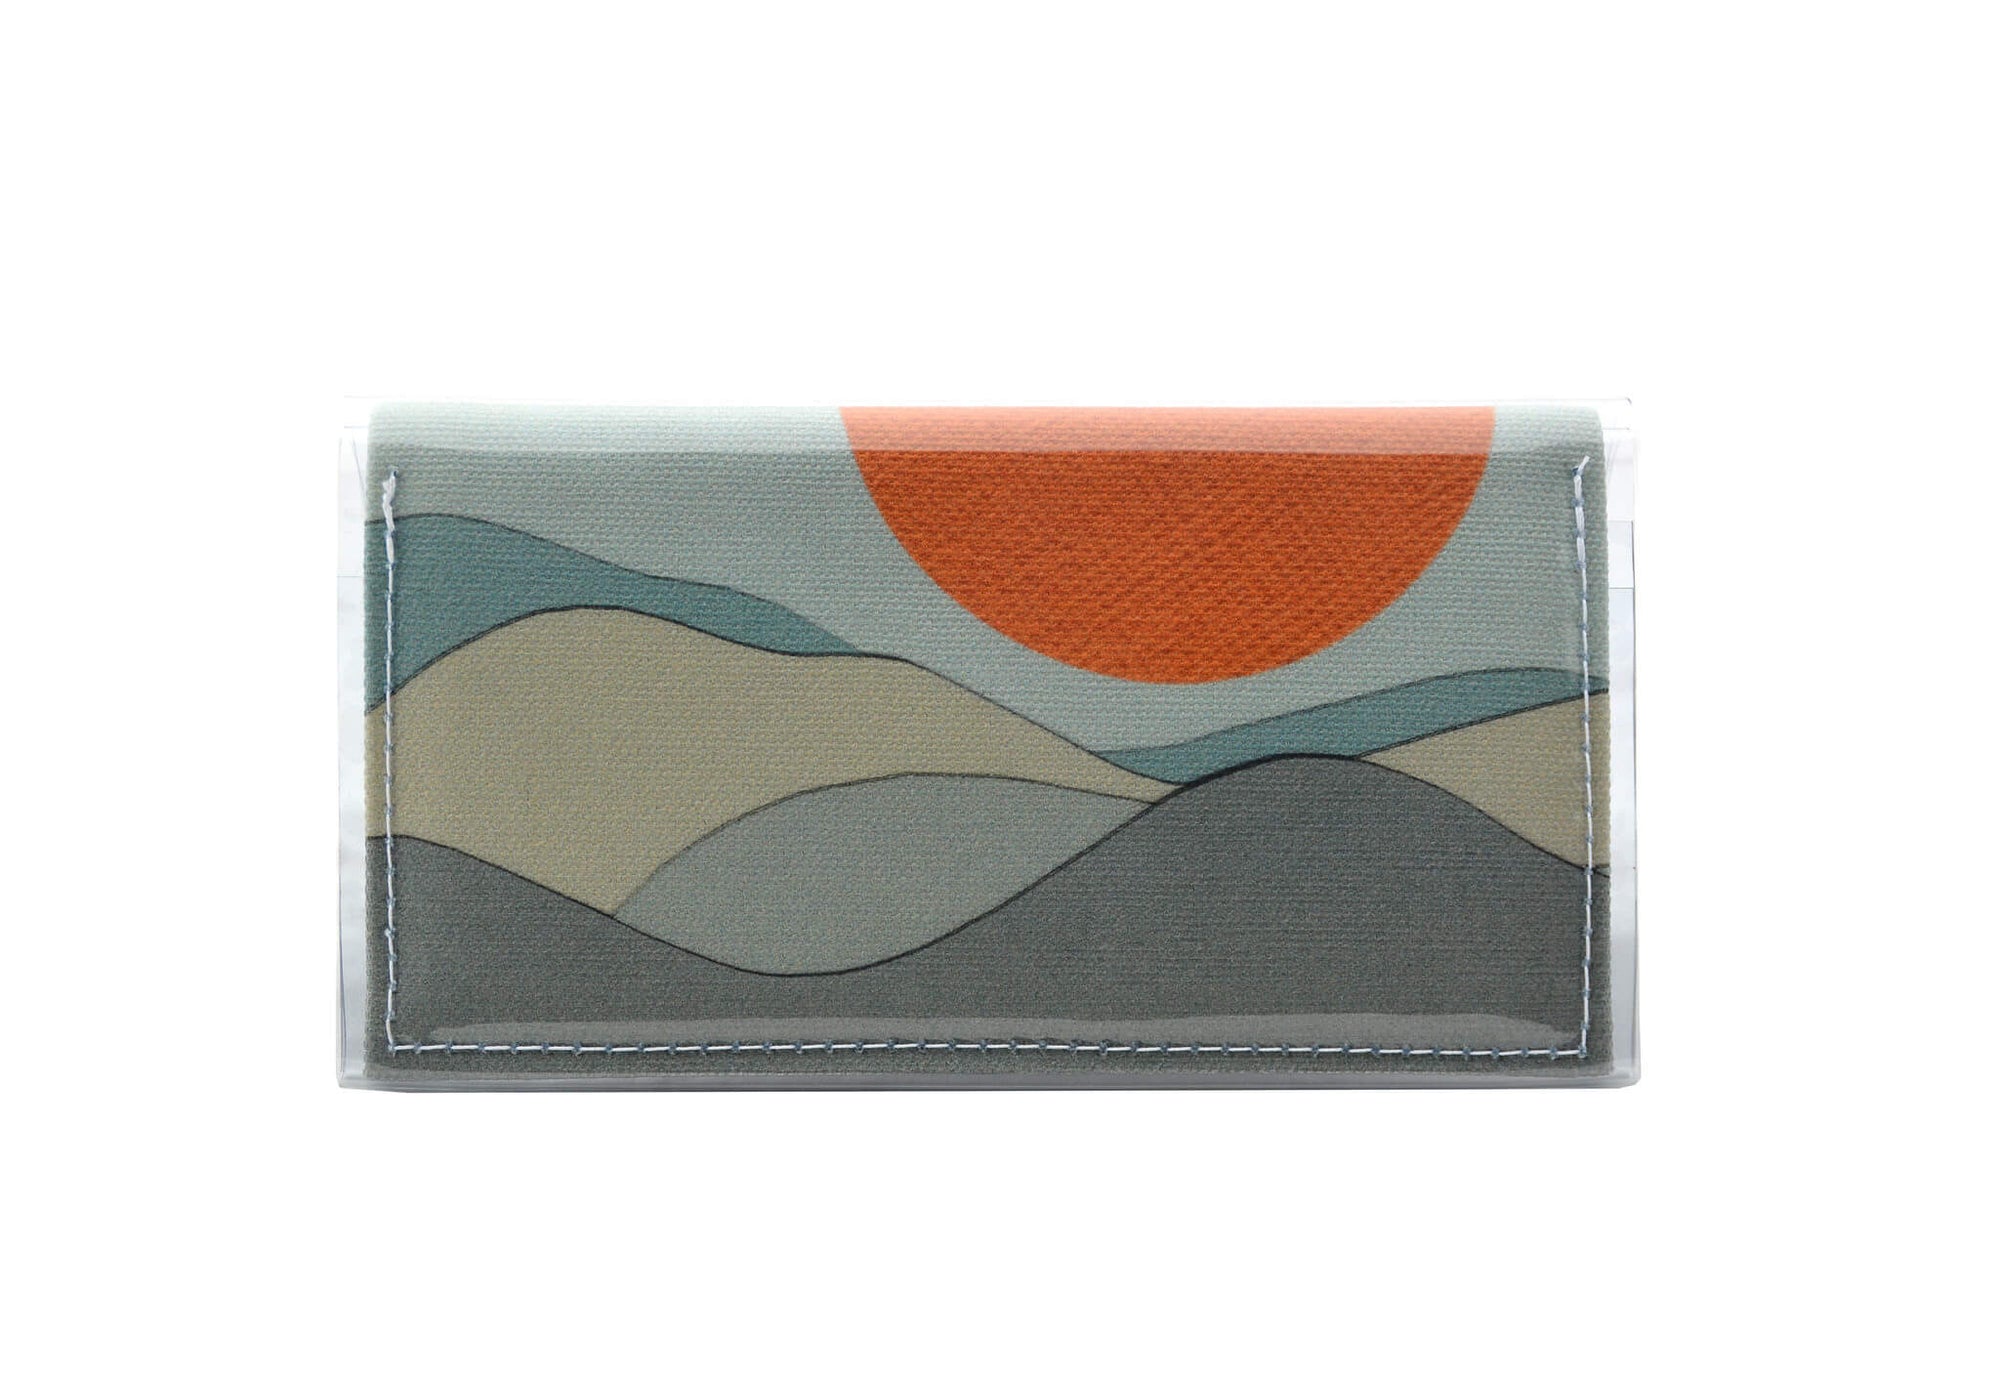 This is an image of the rear of a Kitty Came Home bifold mini purse clutch in 'The night grows pale' design by Satin and Tat. An orange moon floats above a pale landscape. This is the small size.